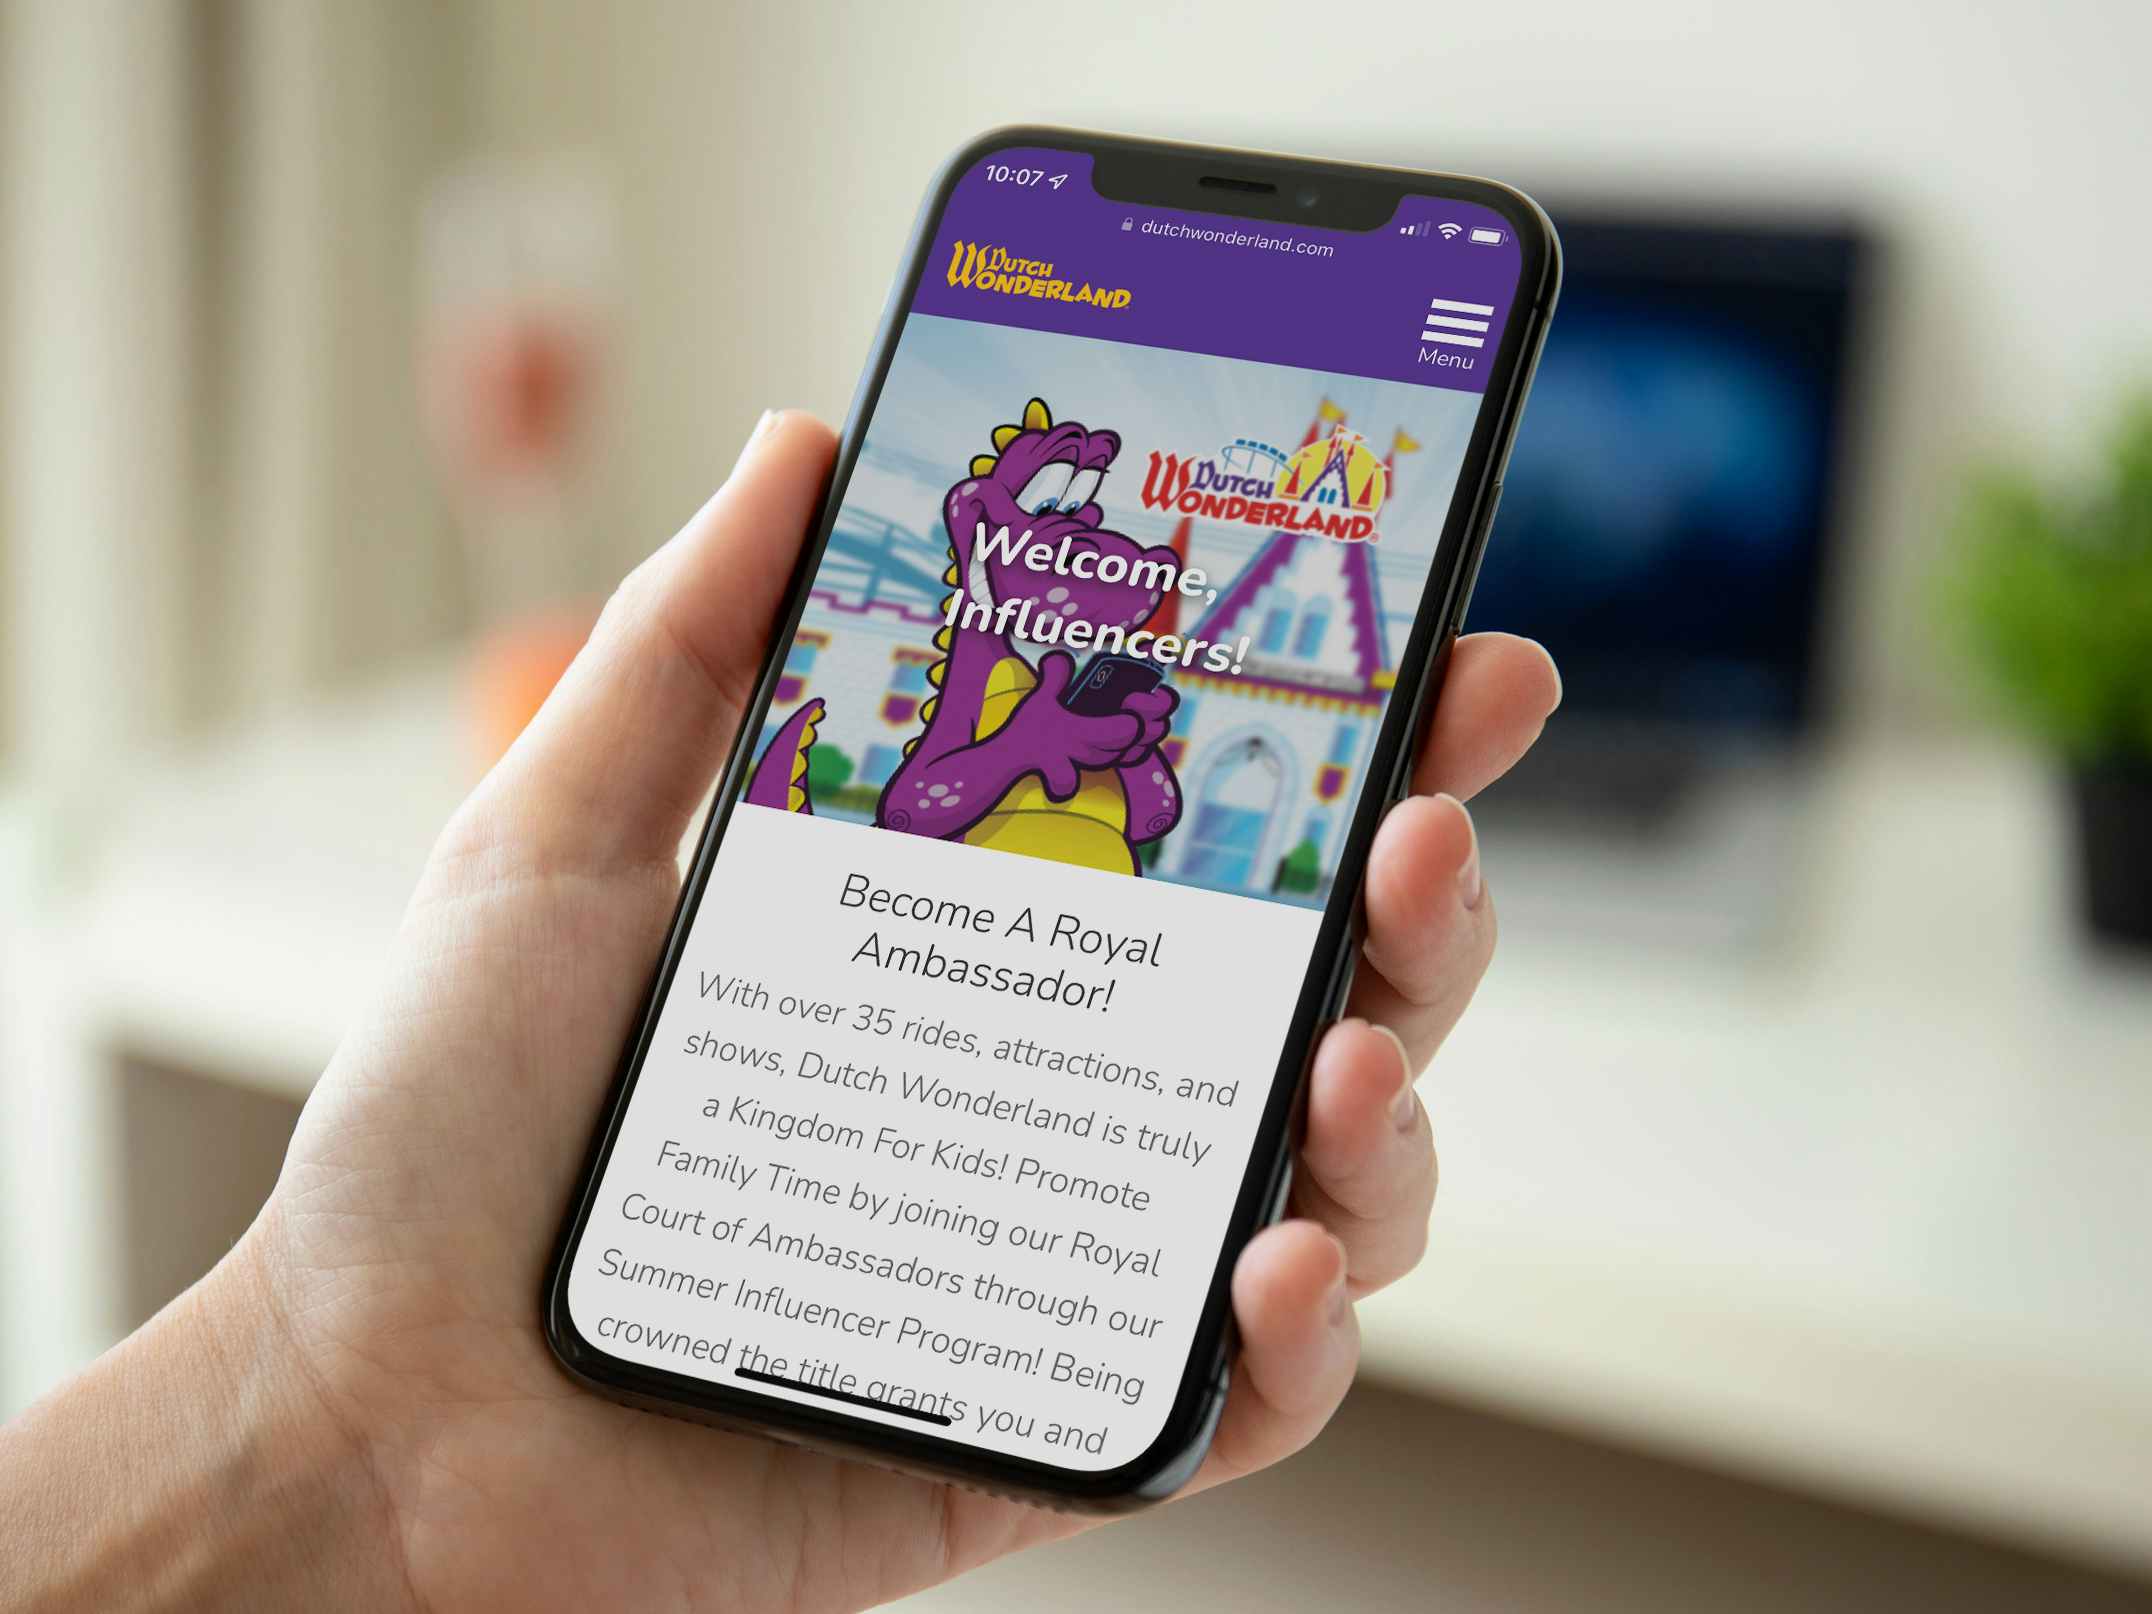 A person's hand holding a cell phone displaying the Dutch Wonderland website's page about their influencer program.